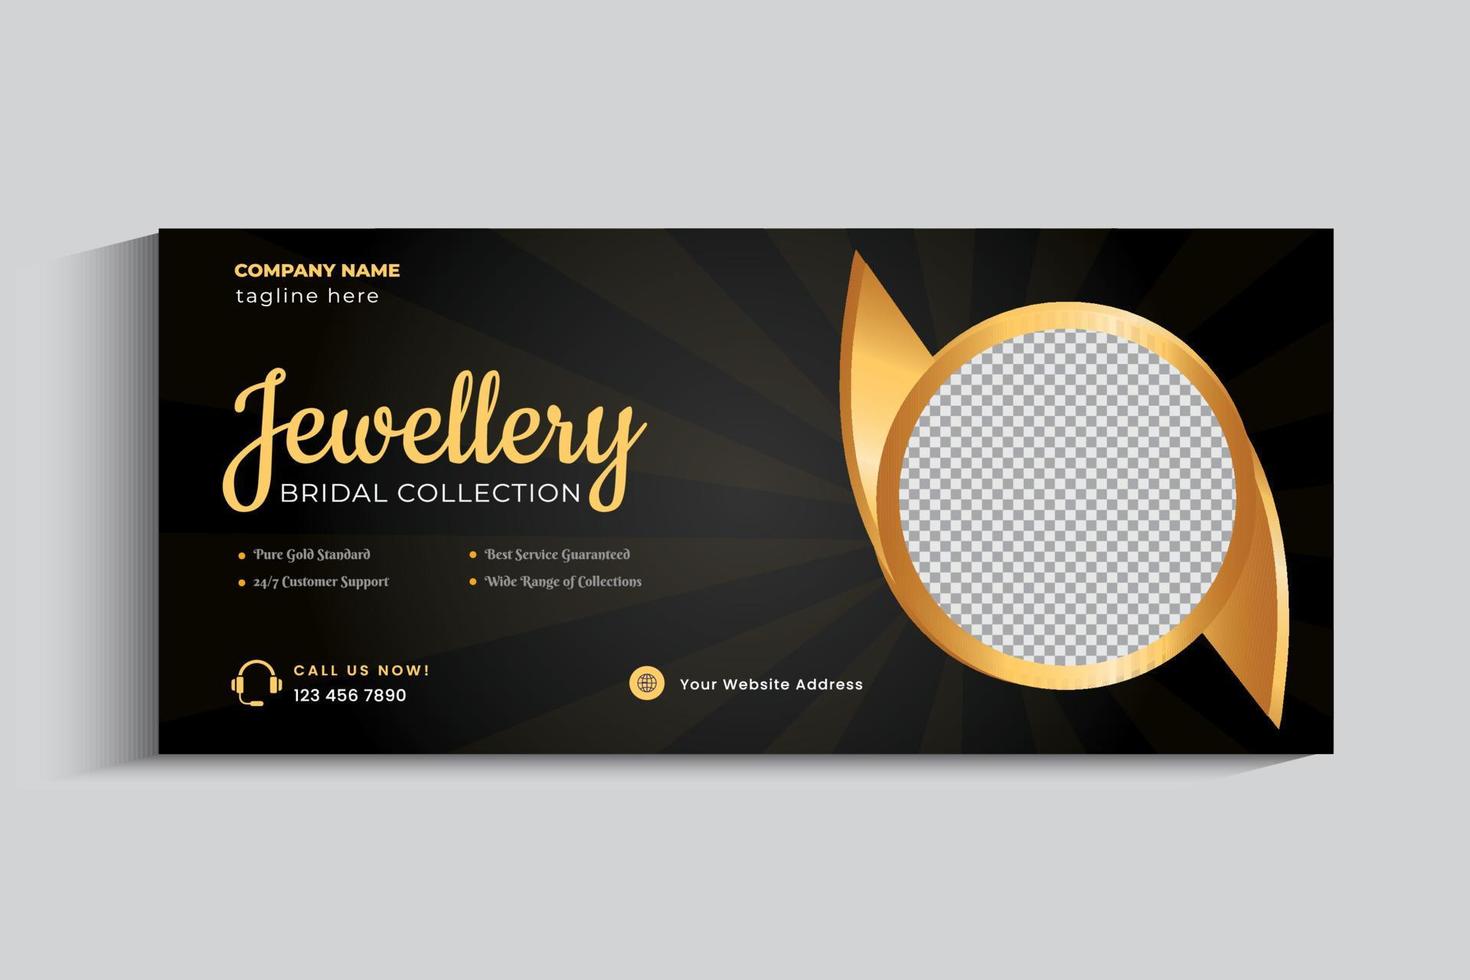 Jewelry Business Cover Banner design Template. Gold ornament Social media post vector